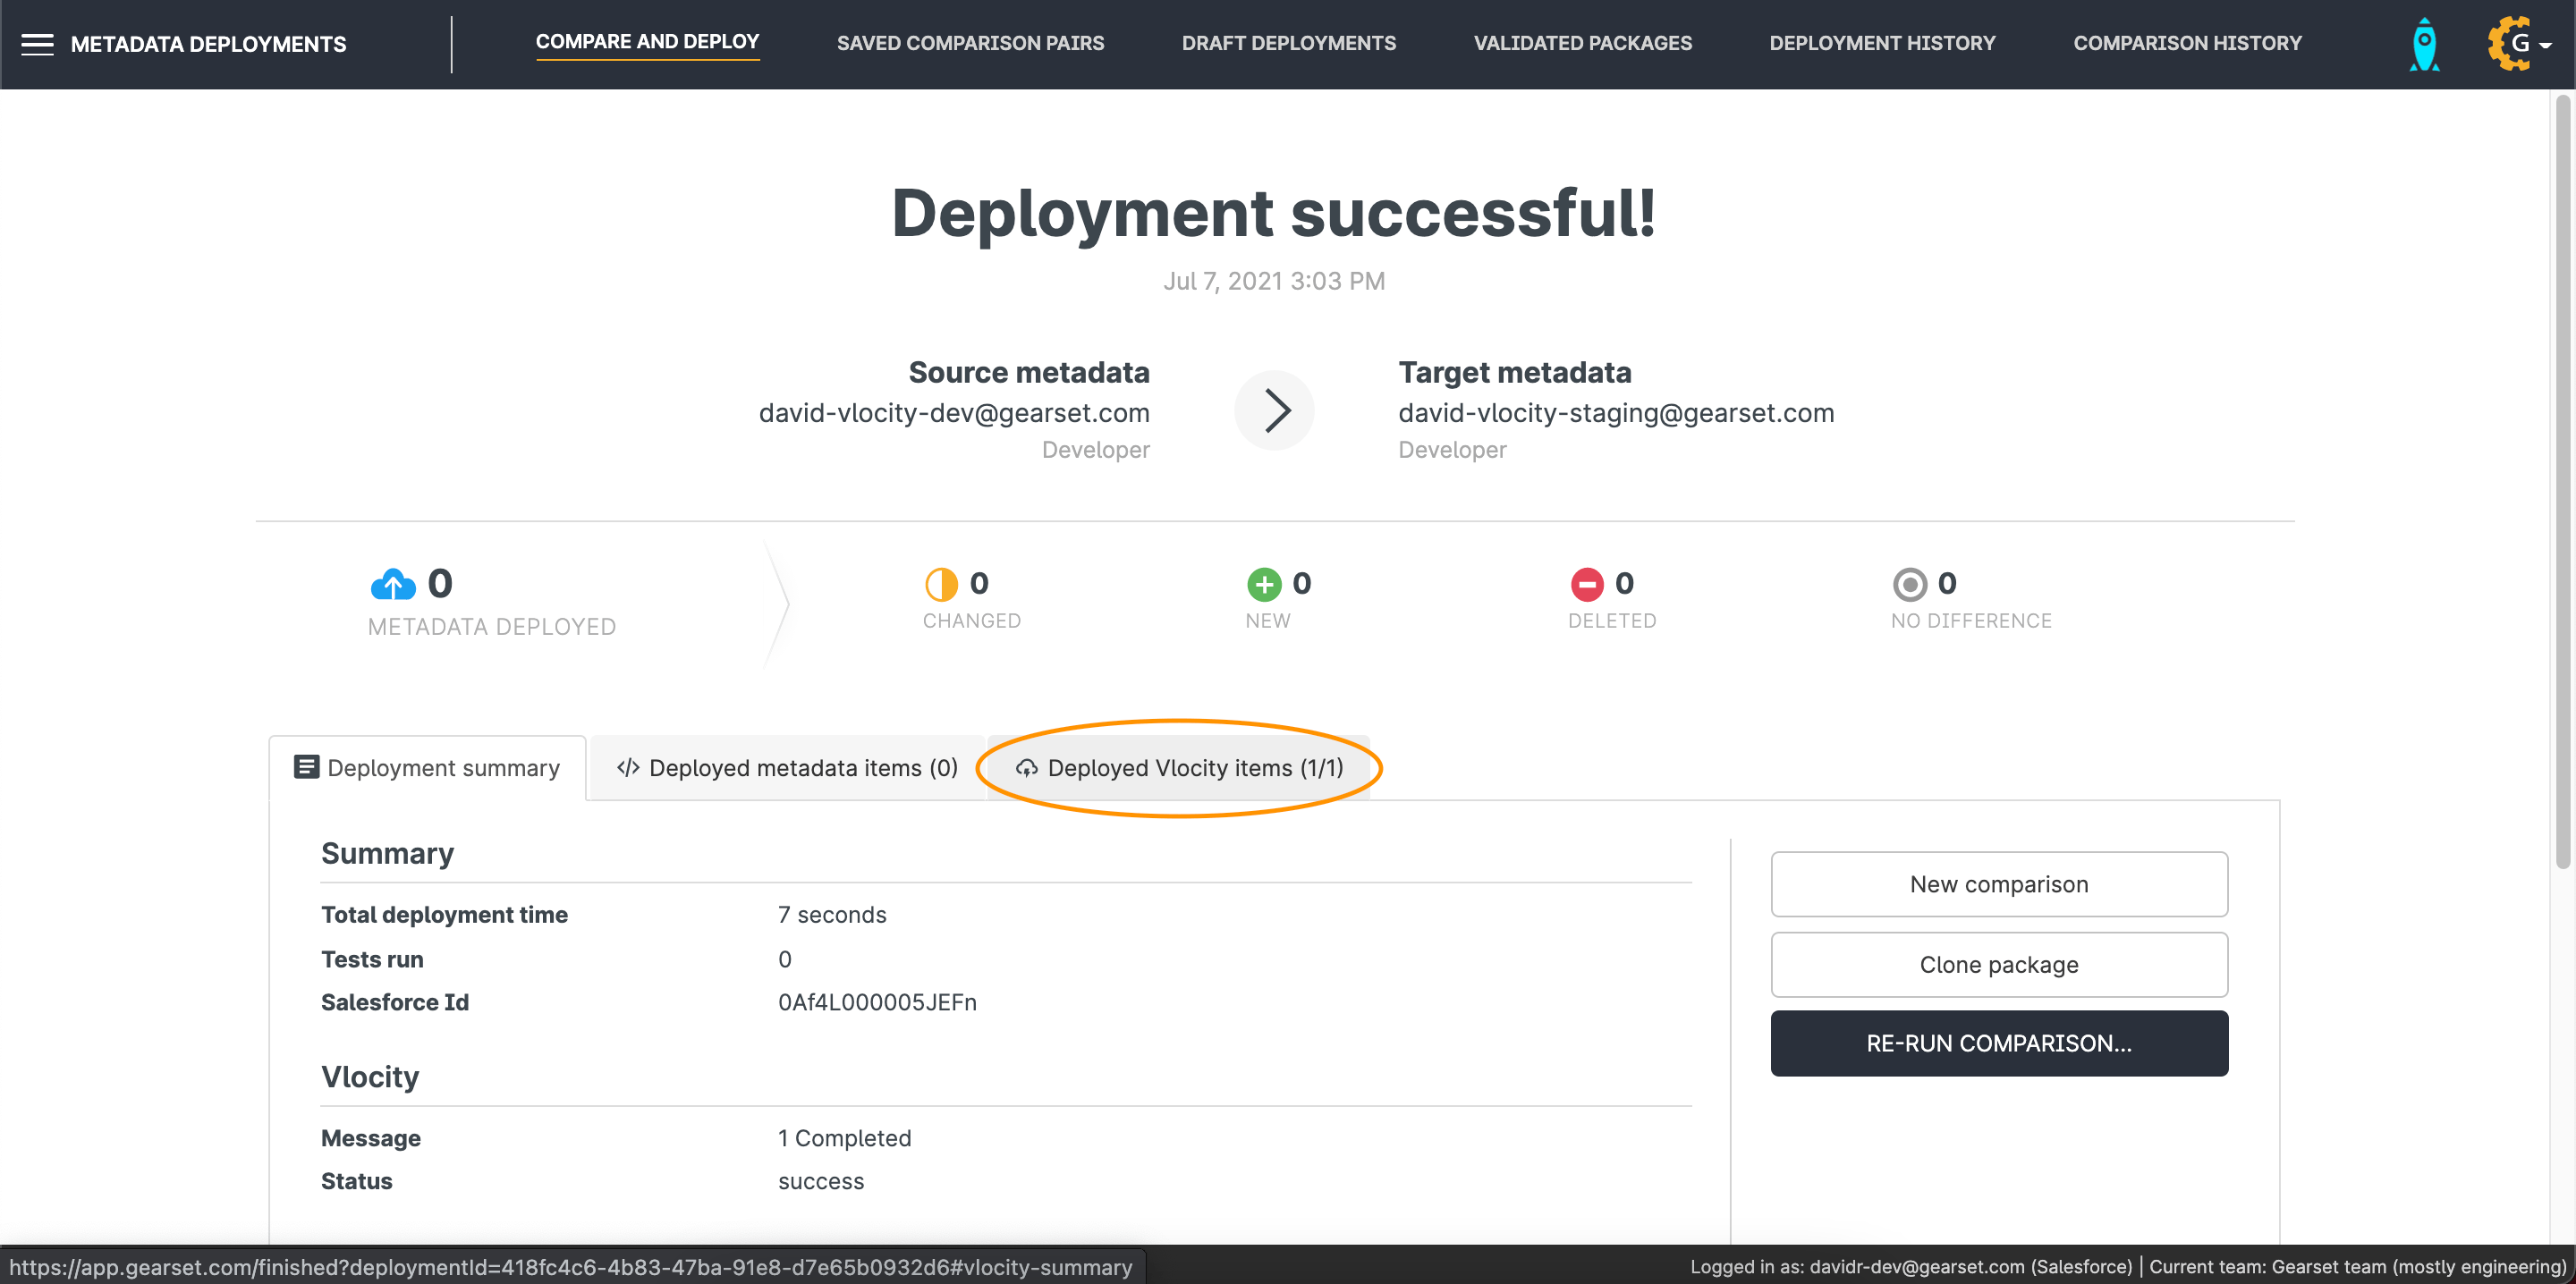 Gearset's deployment success page